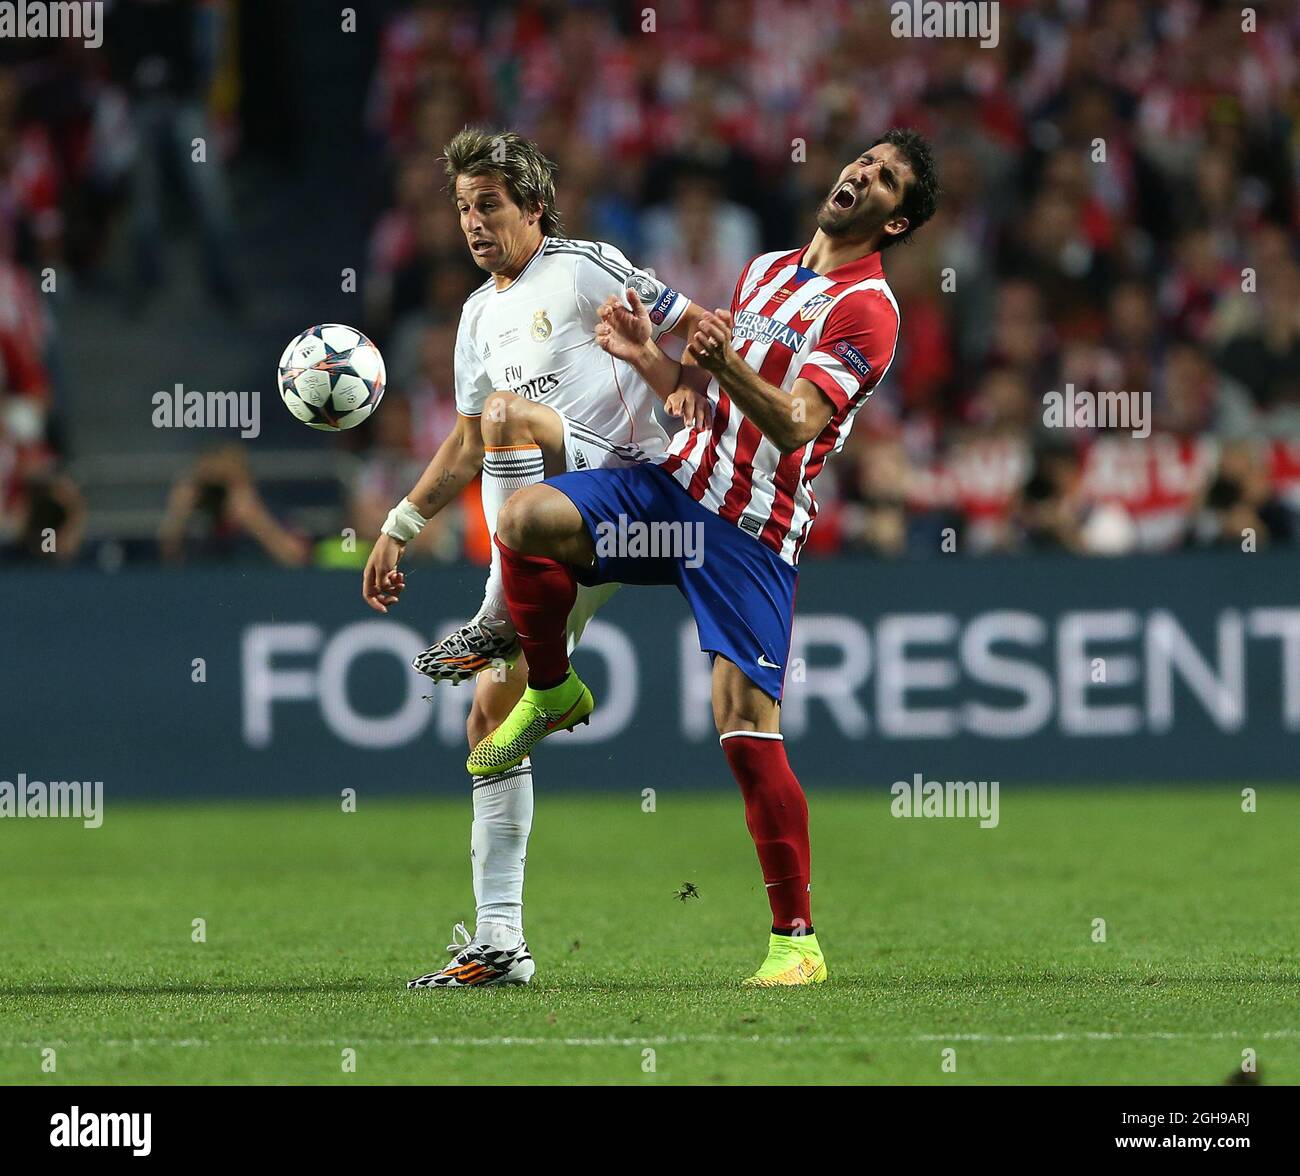 Real Madrid Fabio Coentrao tussles with Atletico Madrid's Raul Garcia during the UEFA Champions League soccer final match between Real Madrid and Atletico Madrid at Estadio da Luz Stadium in Lisbon, Portugal on May 24, 2014. Pictured by David Klein/Sportimage. Stock Photo